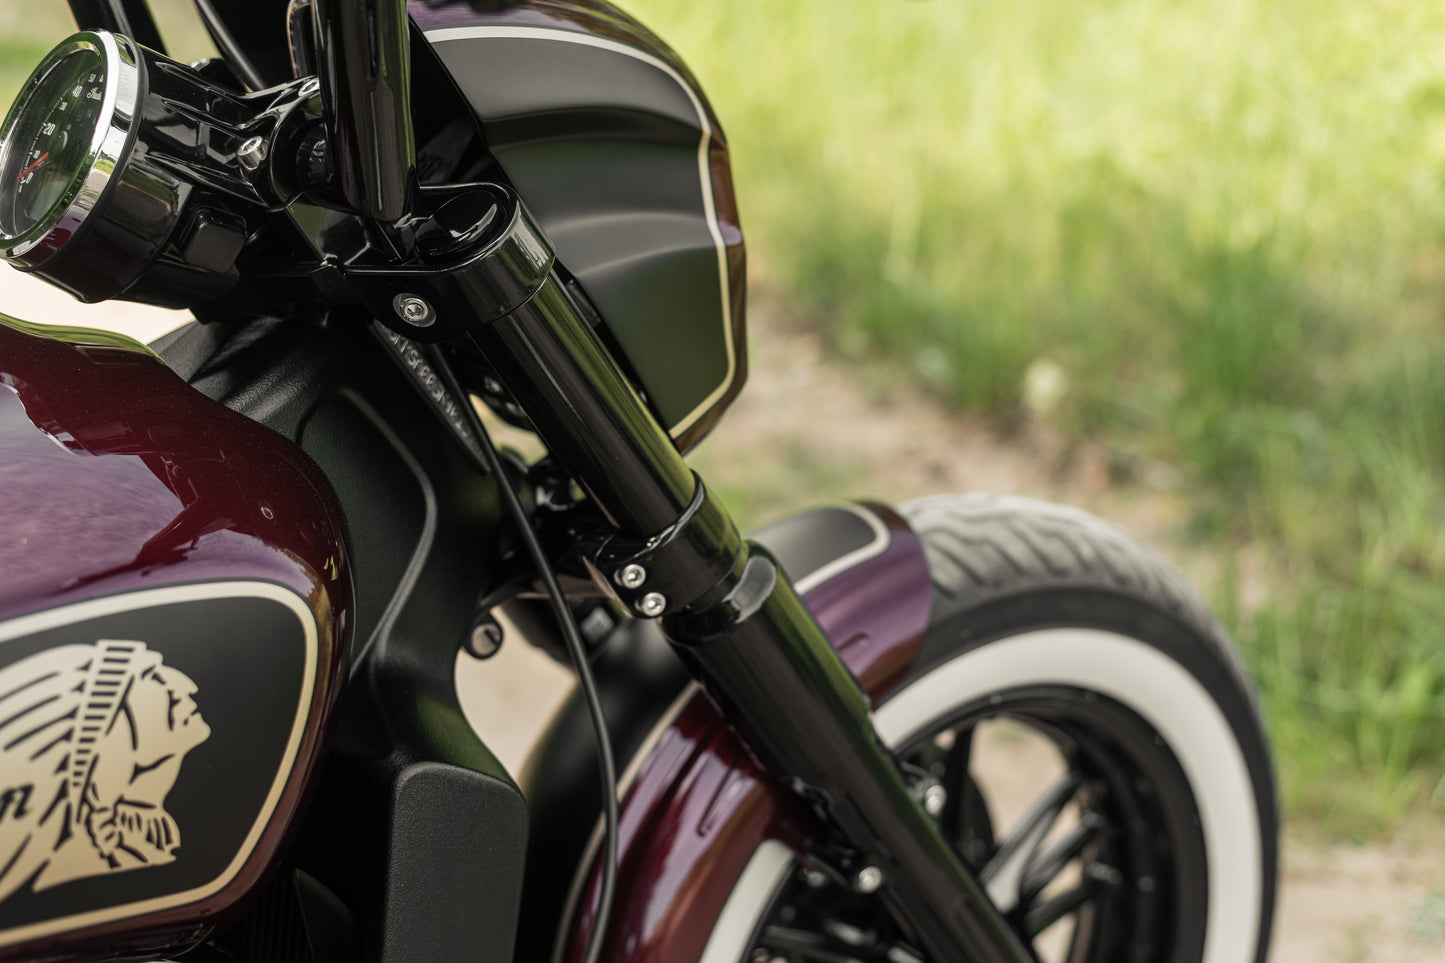 Zoomed Harley Davidson motorcycle with Killer Custom "Tomahawk" full fork covers set green blurry background